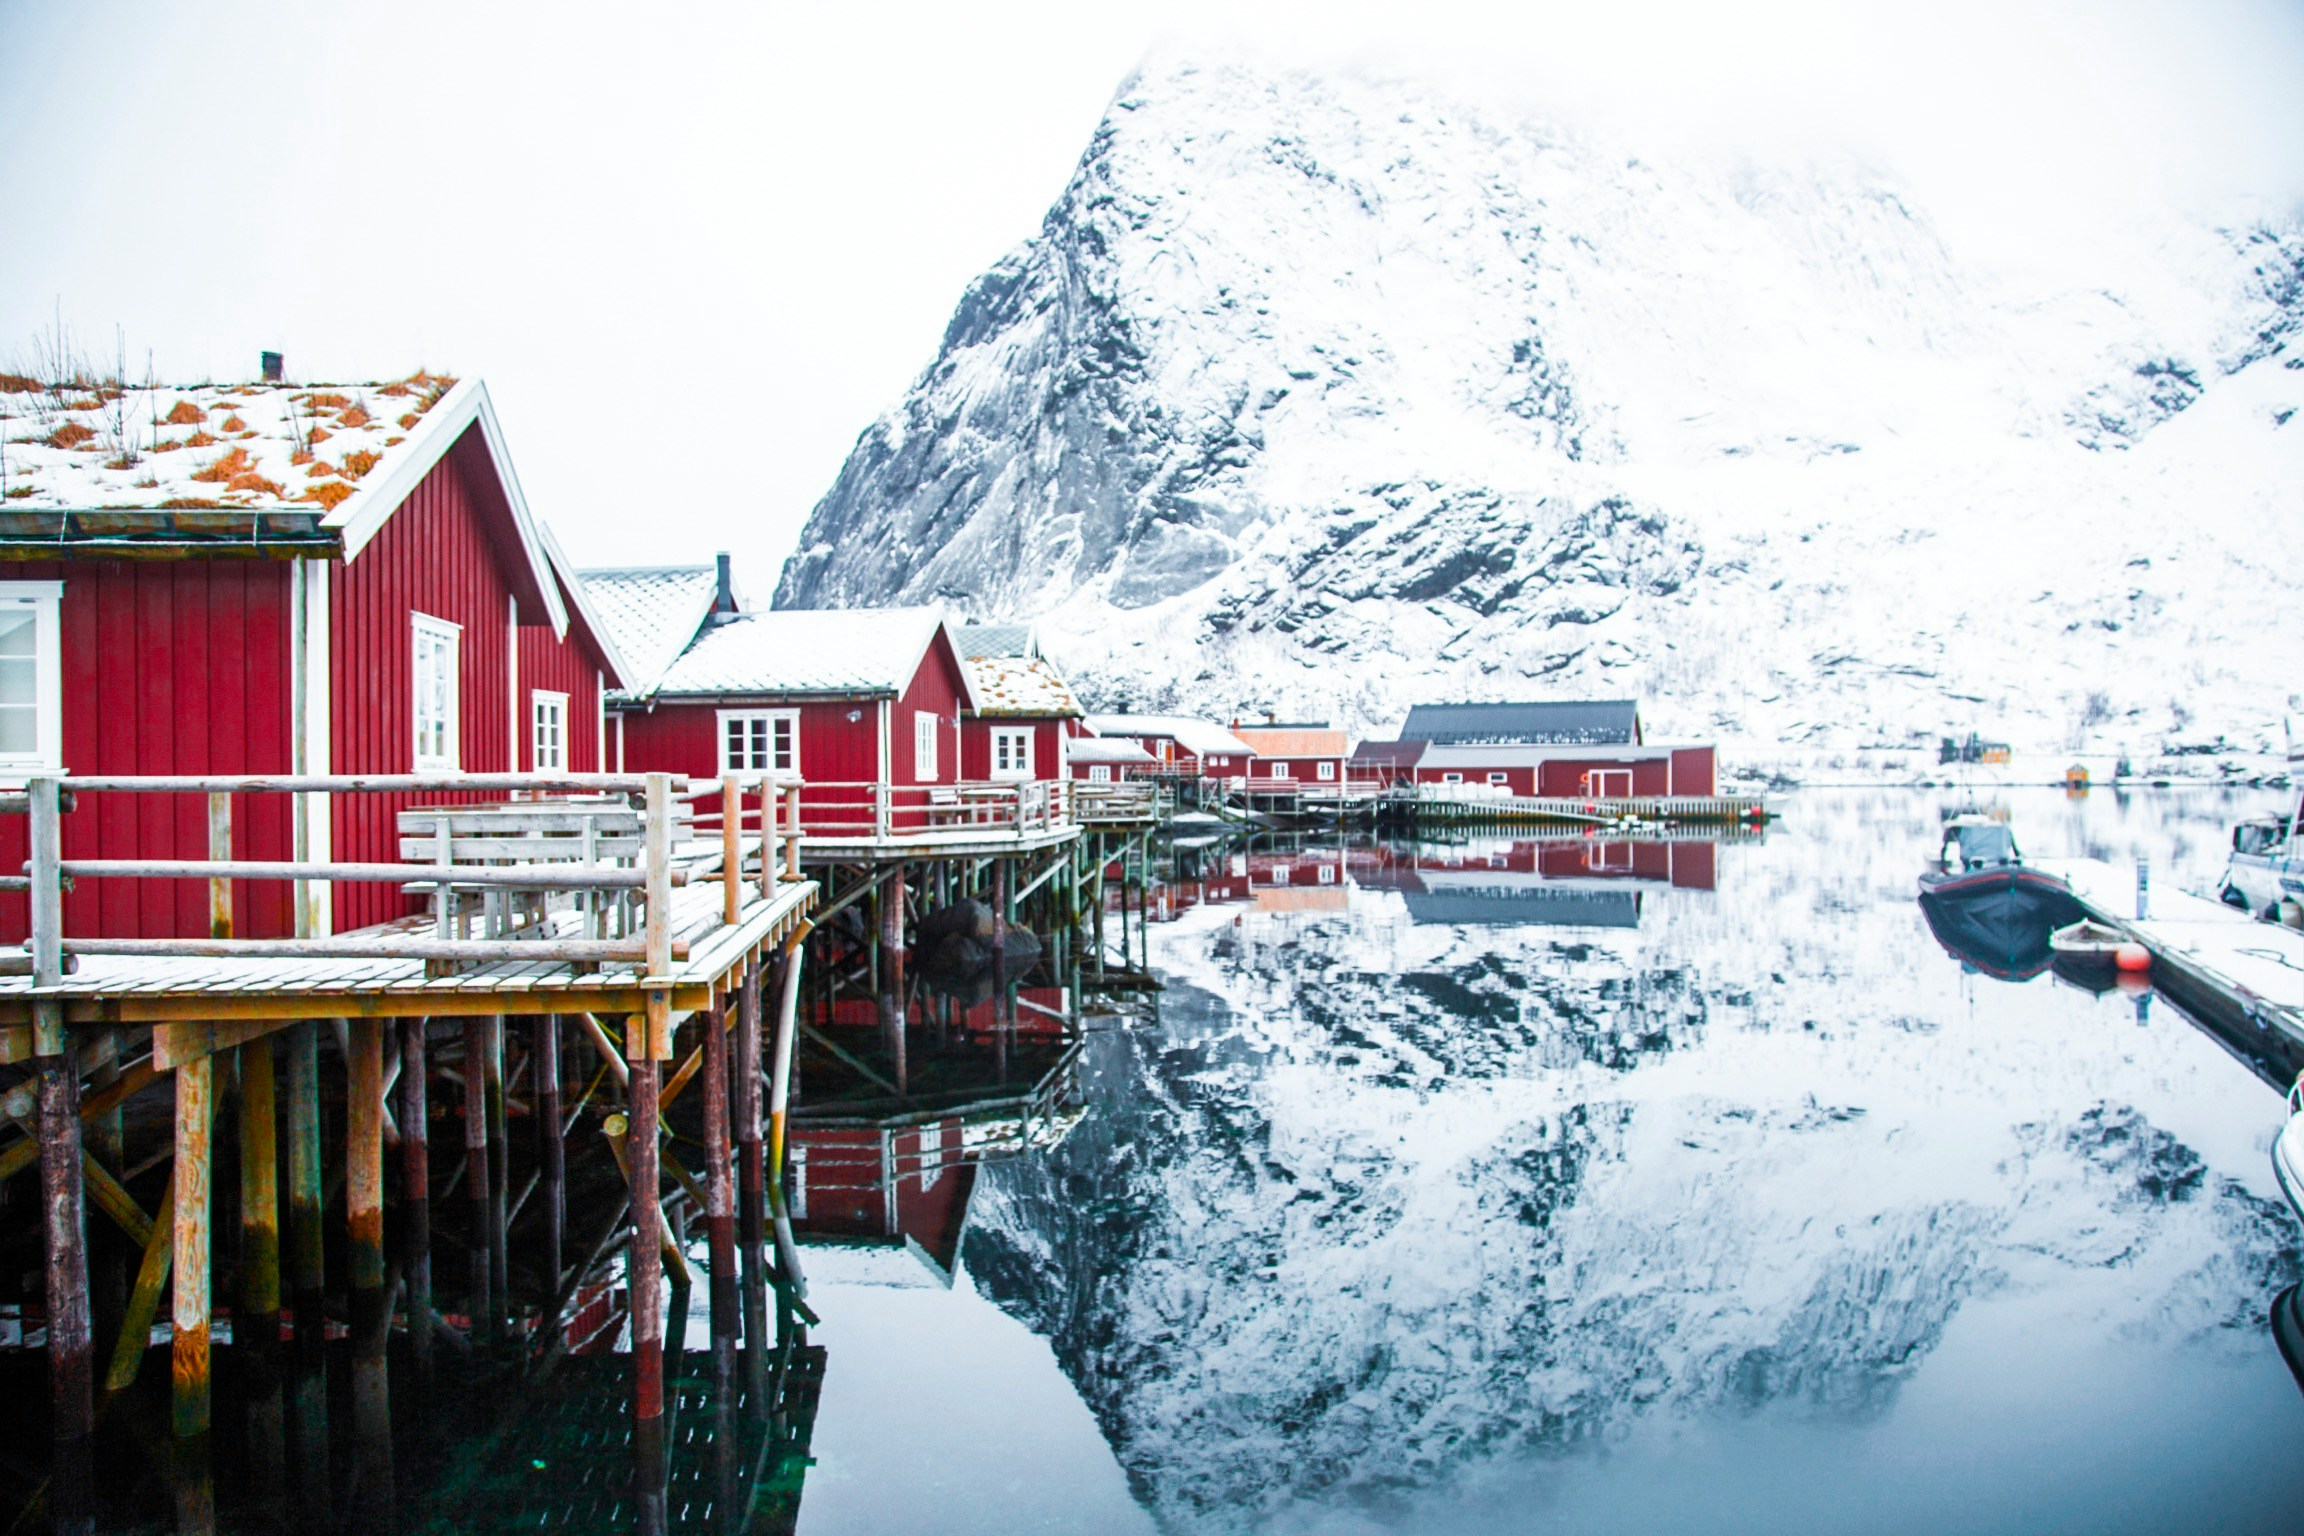 discover the stunning beauty of fjords - majestic natural wonders carved by glacial activity. plan your unforgettable journey through breathtaking landscapes and deep blue waters.